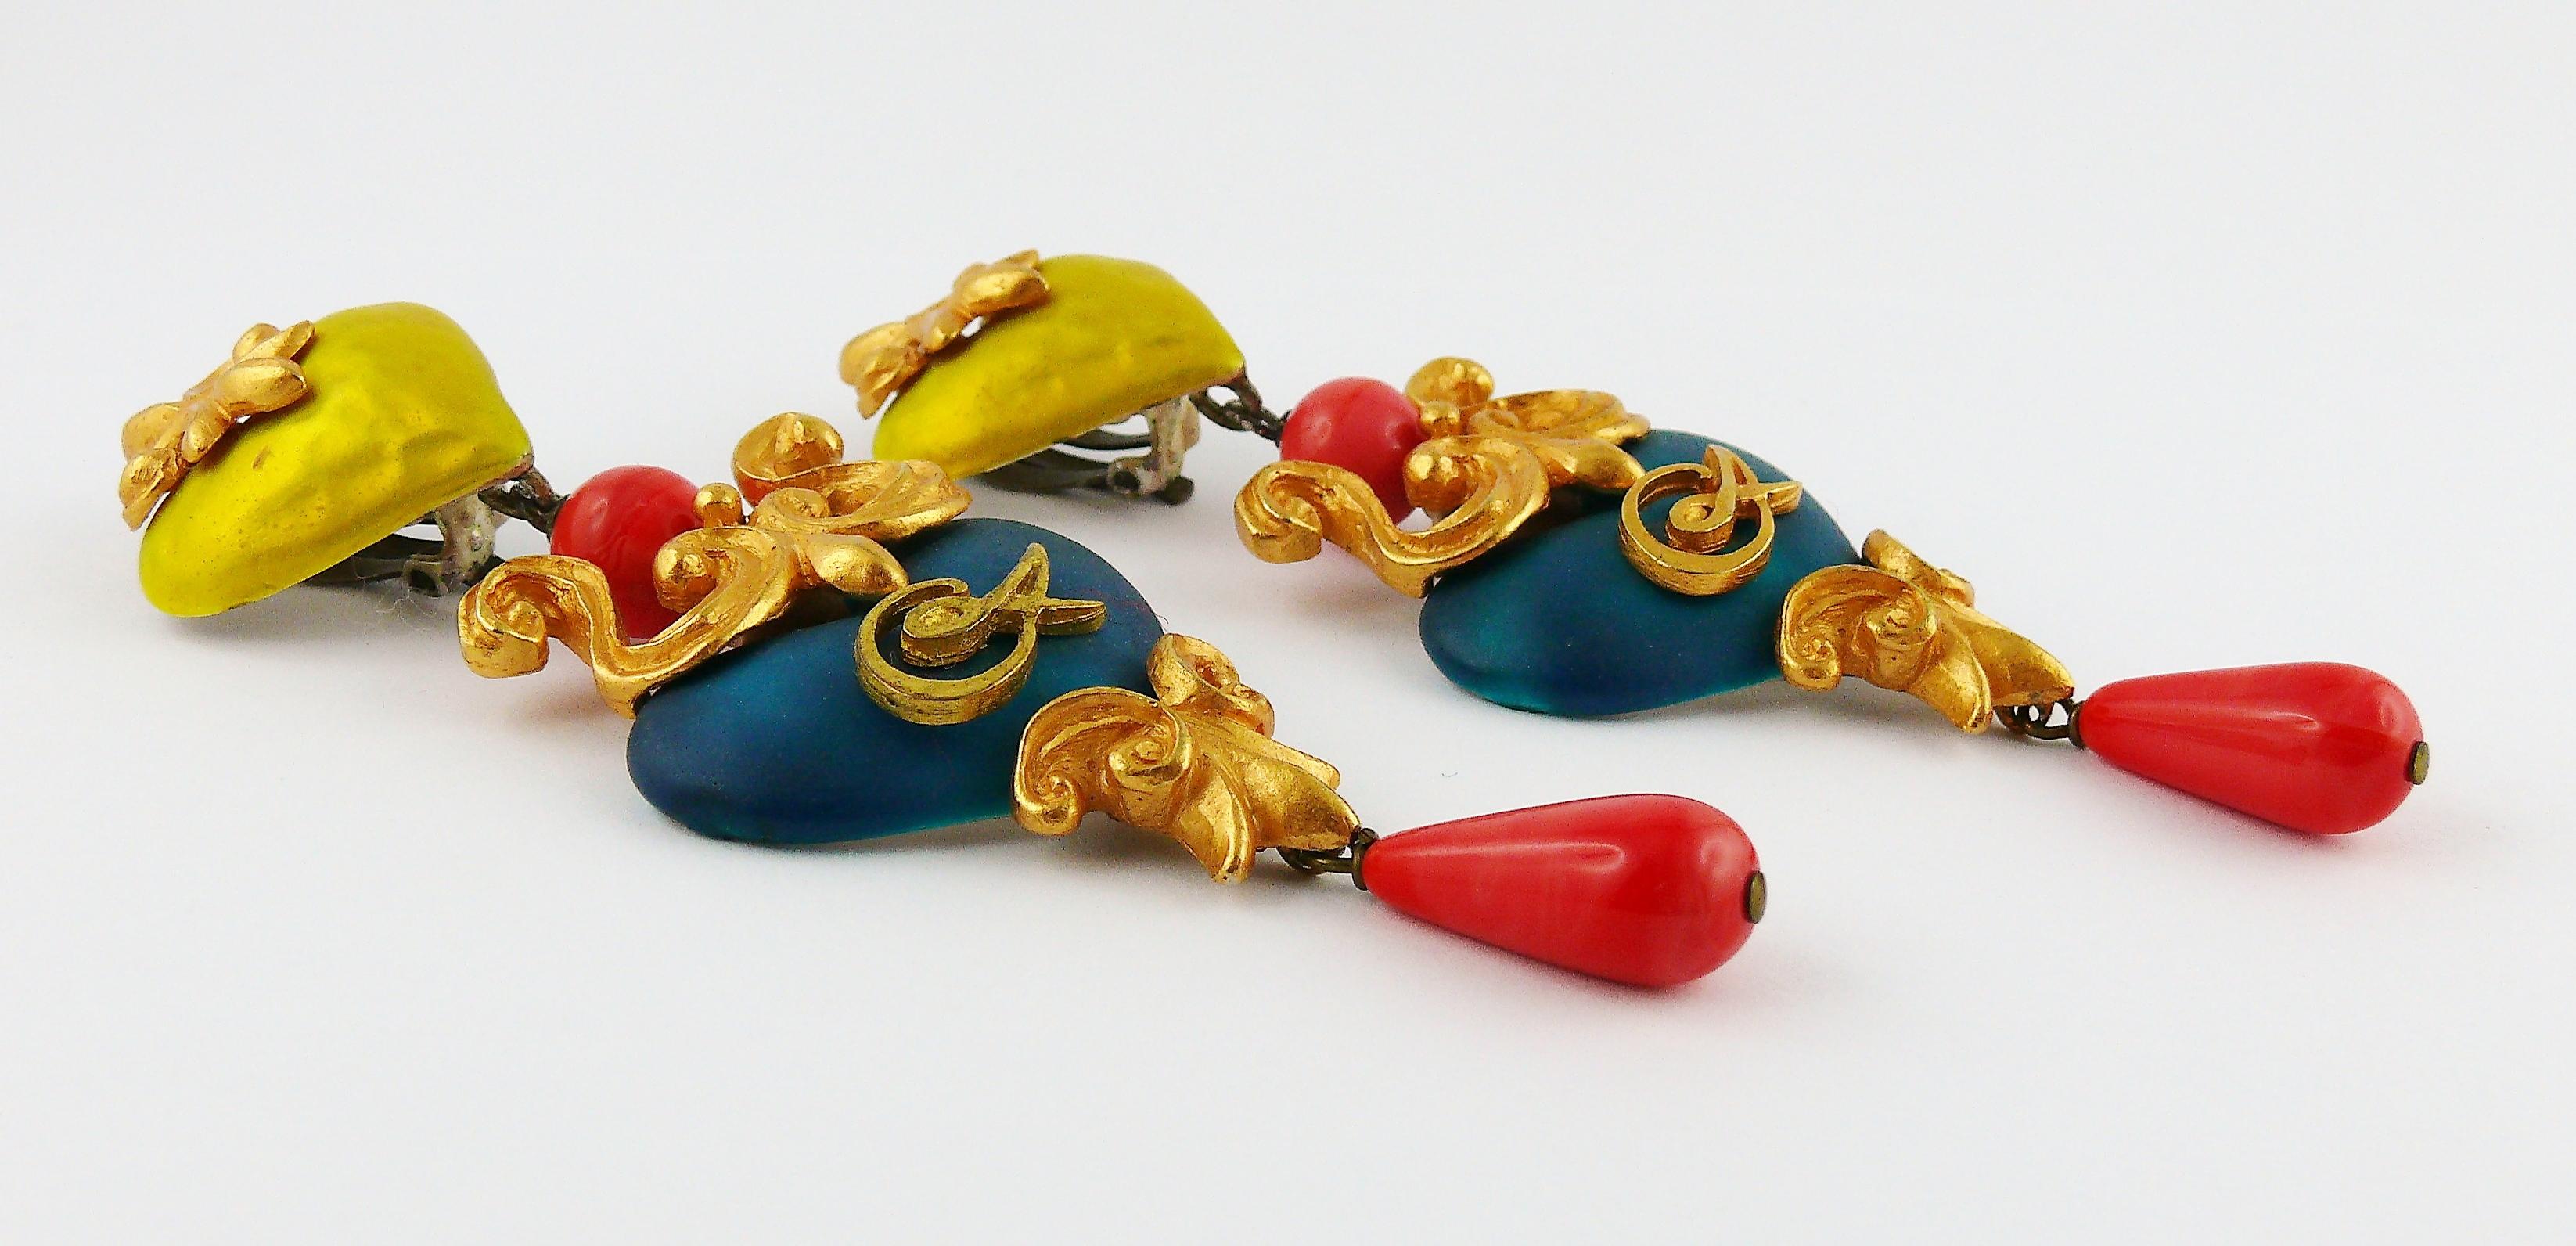 CHRISTIAN LACROIX vintage long Baroque dangling earrings (clip-on) with gold toned details featuring enameled hearts, faux coral bead and drop.

Marked CHRISTIAN LACROIX CL Made in France.

Indicative measurements : length approx. 10.5 cm (4.13